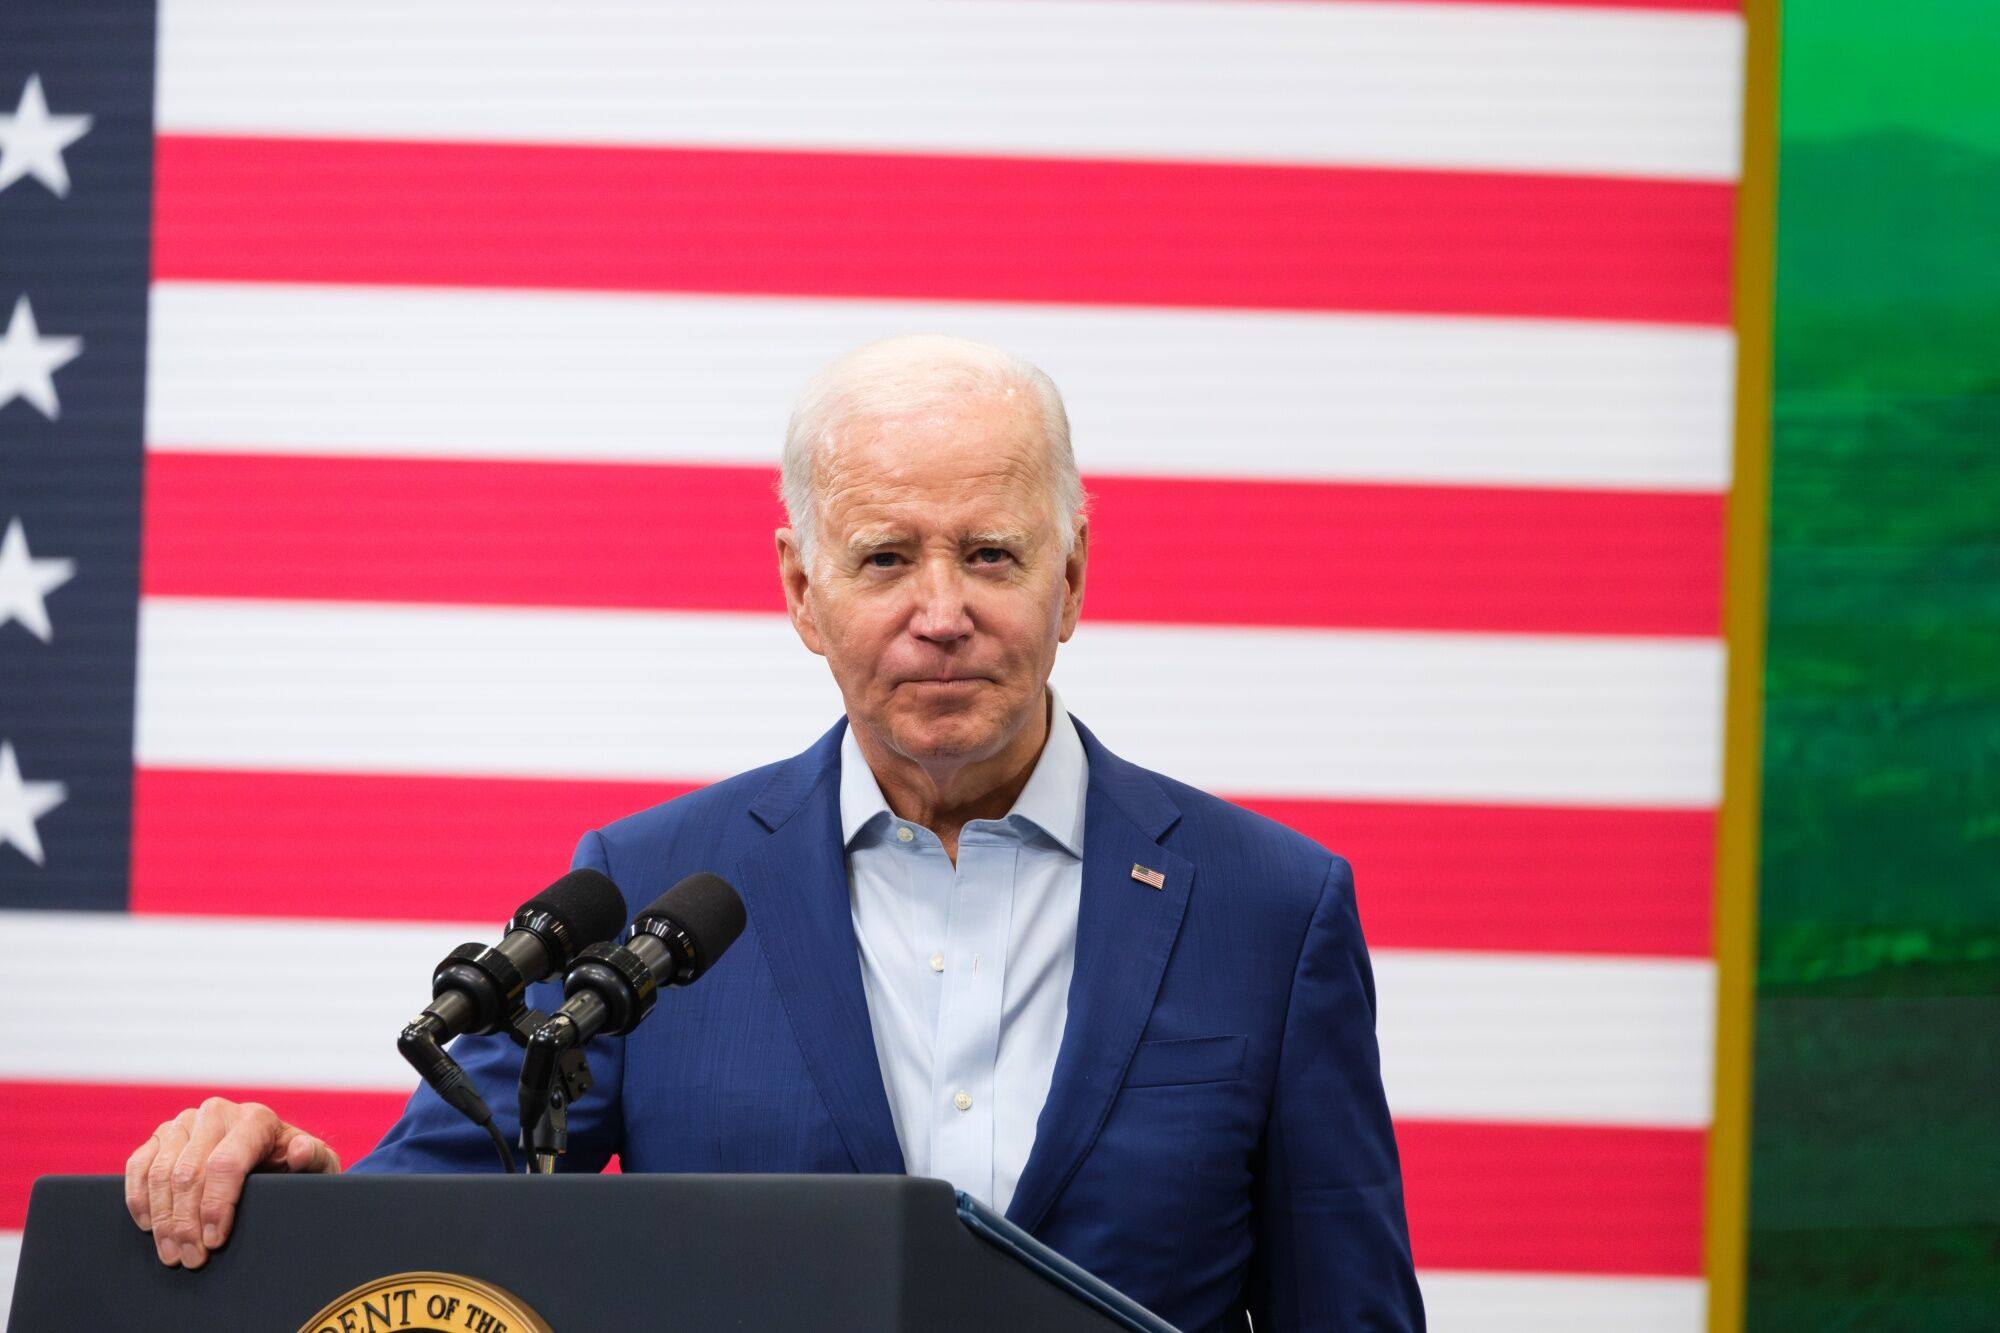 In announcing new tech investment restrictions on Wednesday, US President Joe Biden declared “a national emergency”. Photo: Bloomberg